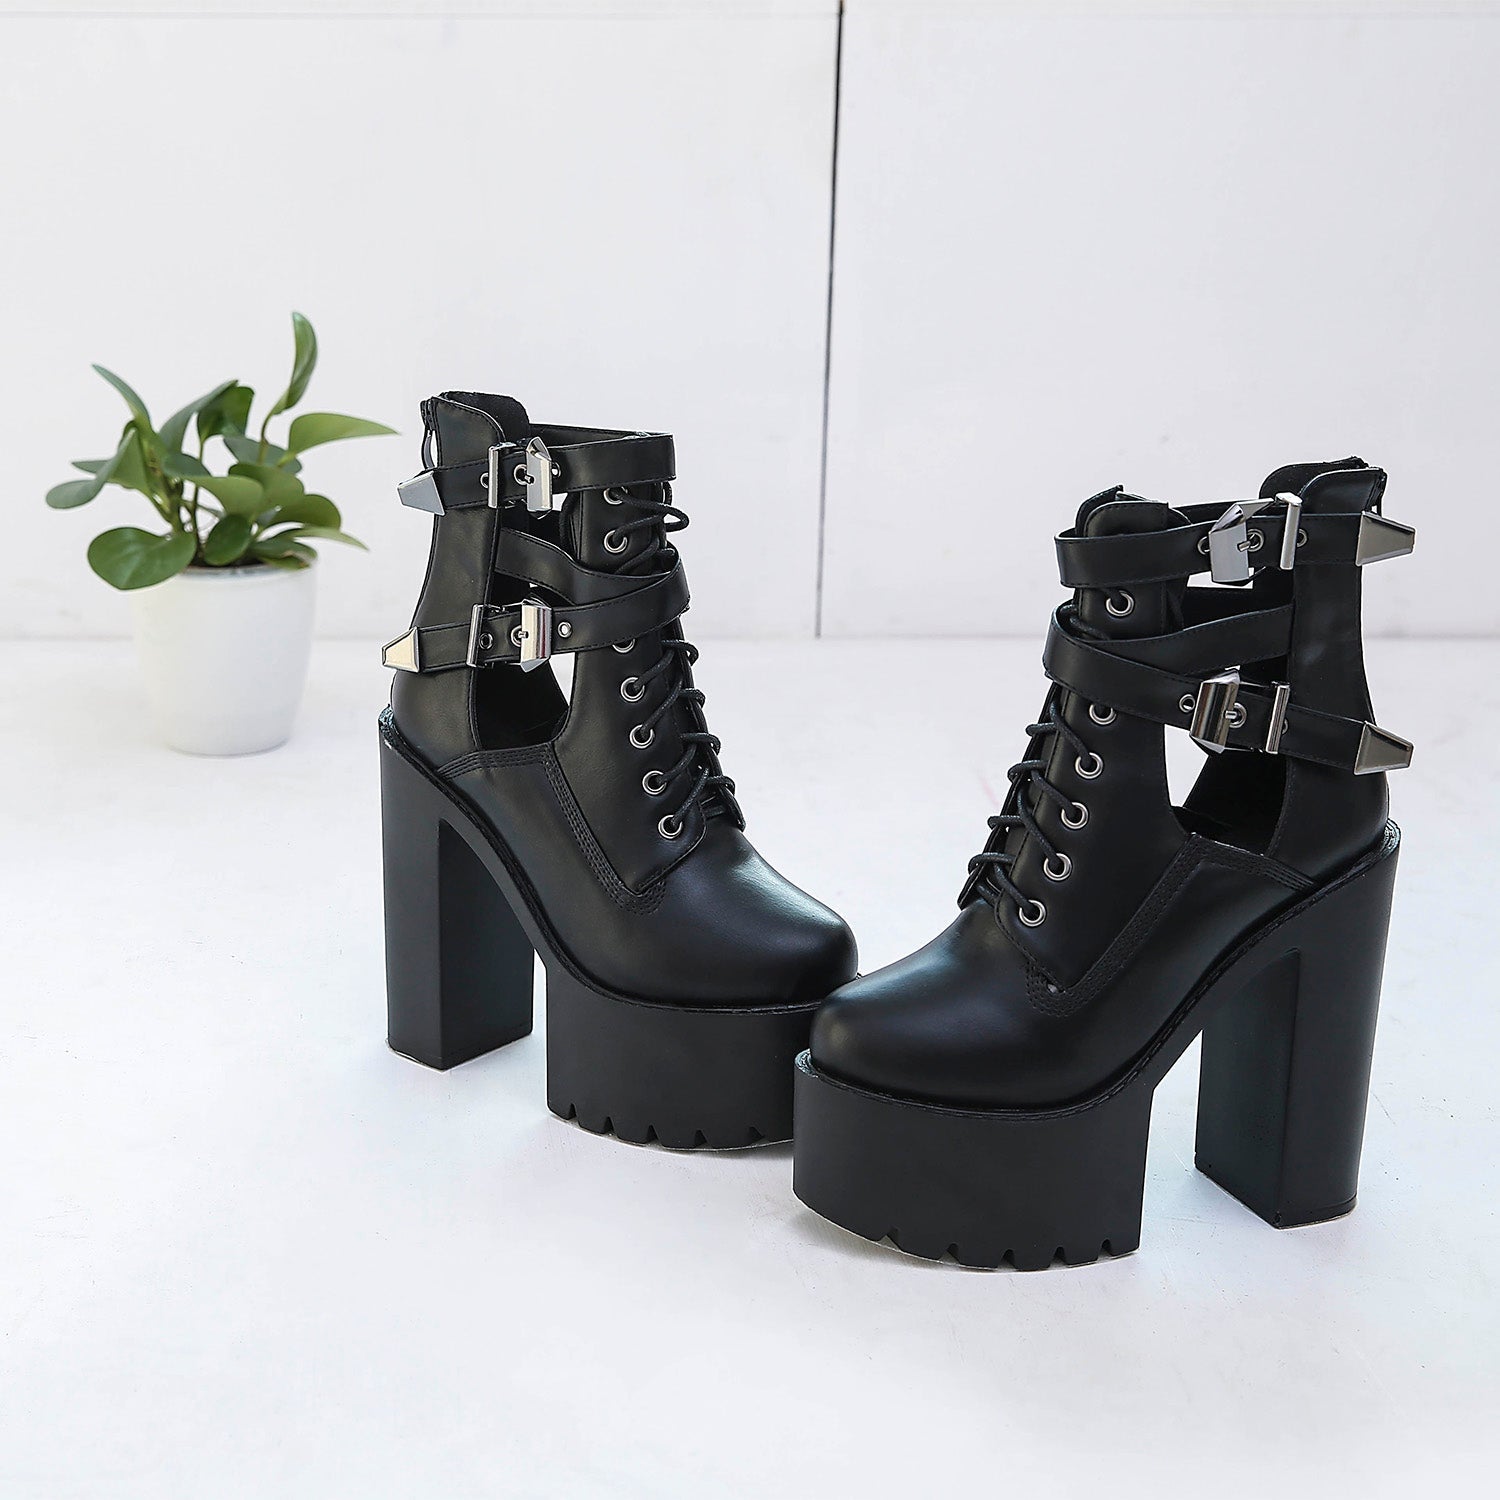 Genuine Leather High Heels Rock Style Boots / Alternative Thick Platform Boots - HARD'N'HEAVY